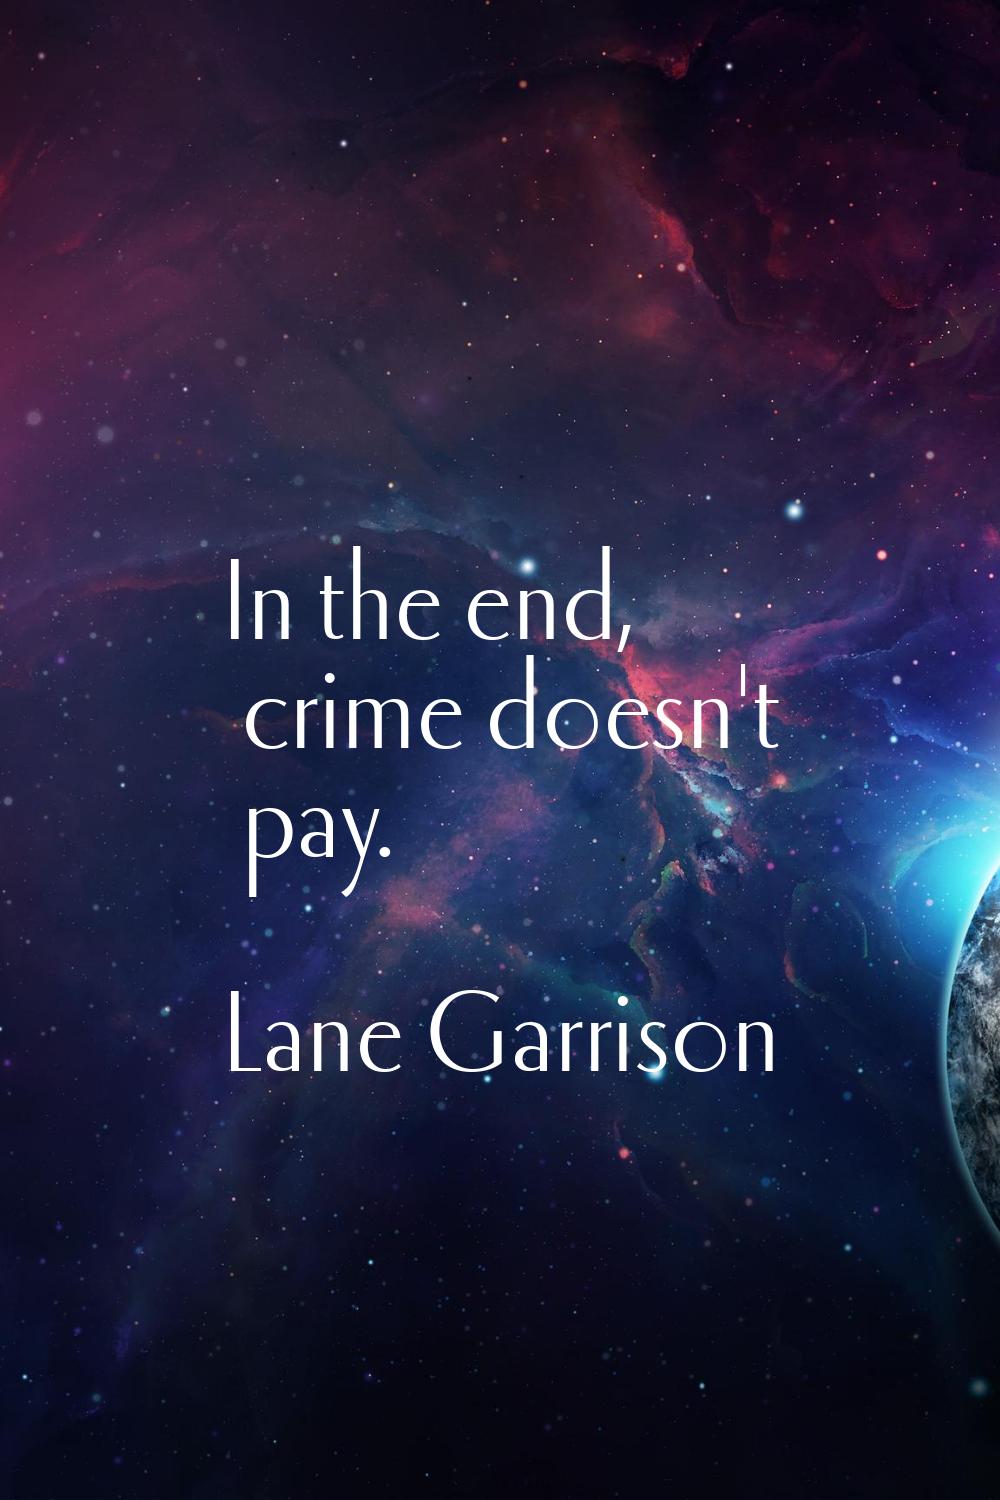 In the end, crime doesn't pay.